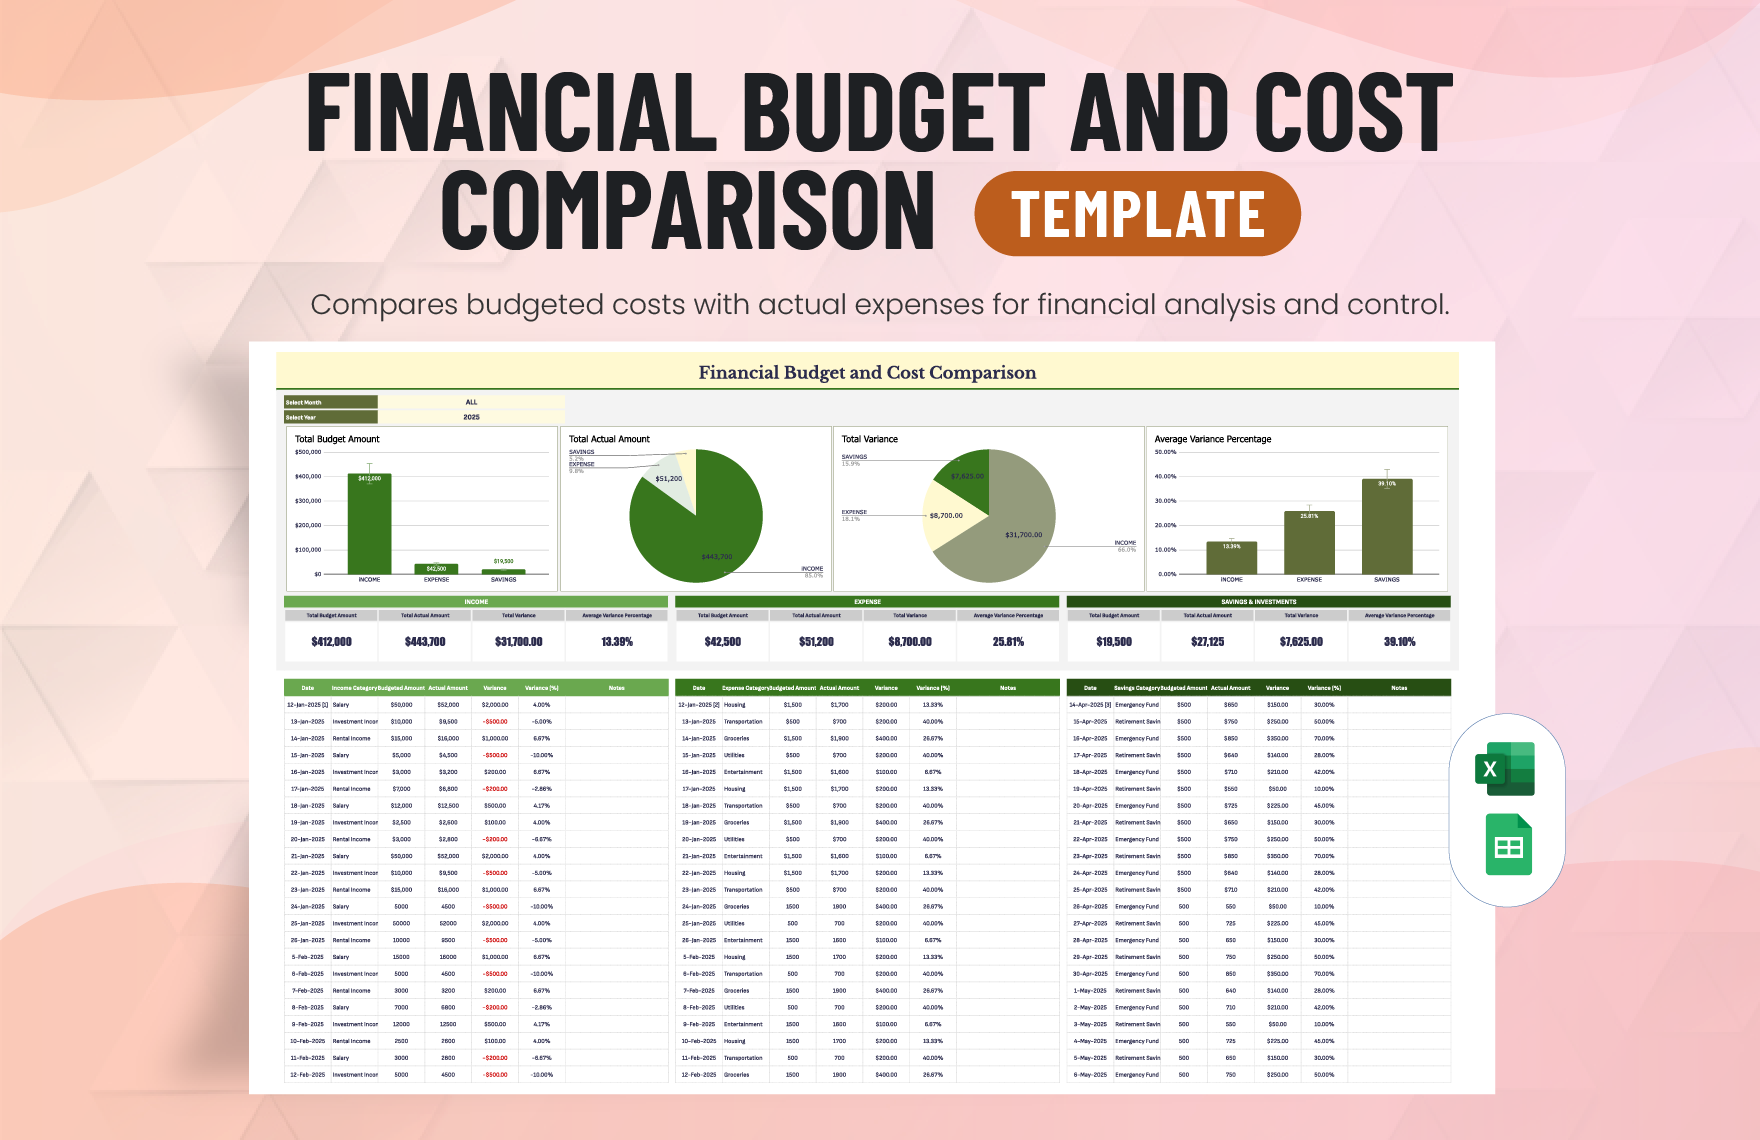 Financial Budget and Cost Comparison Template